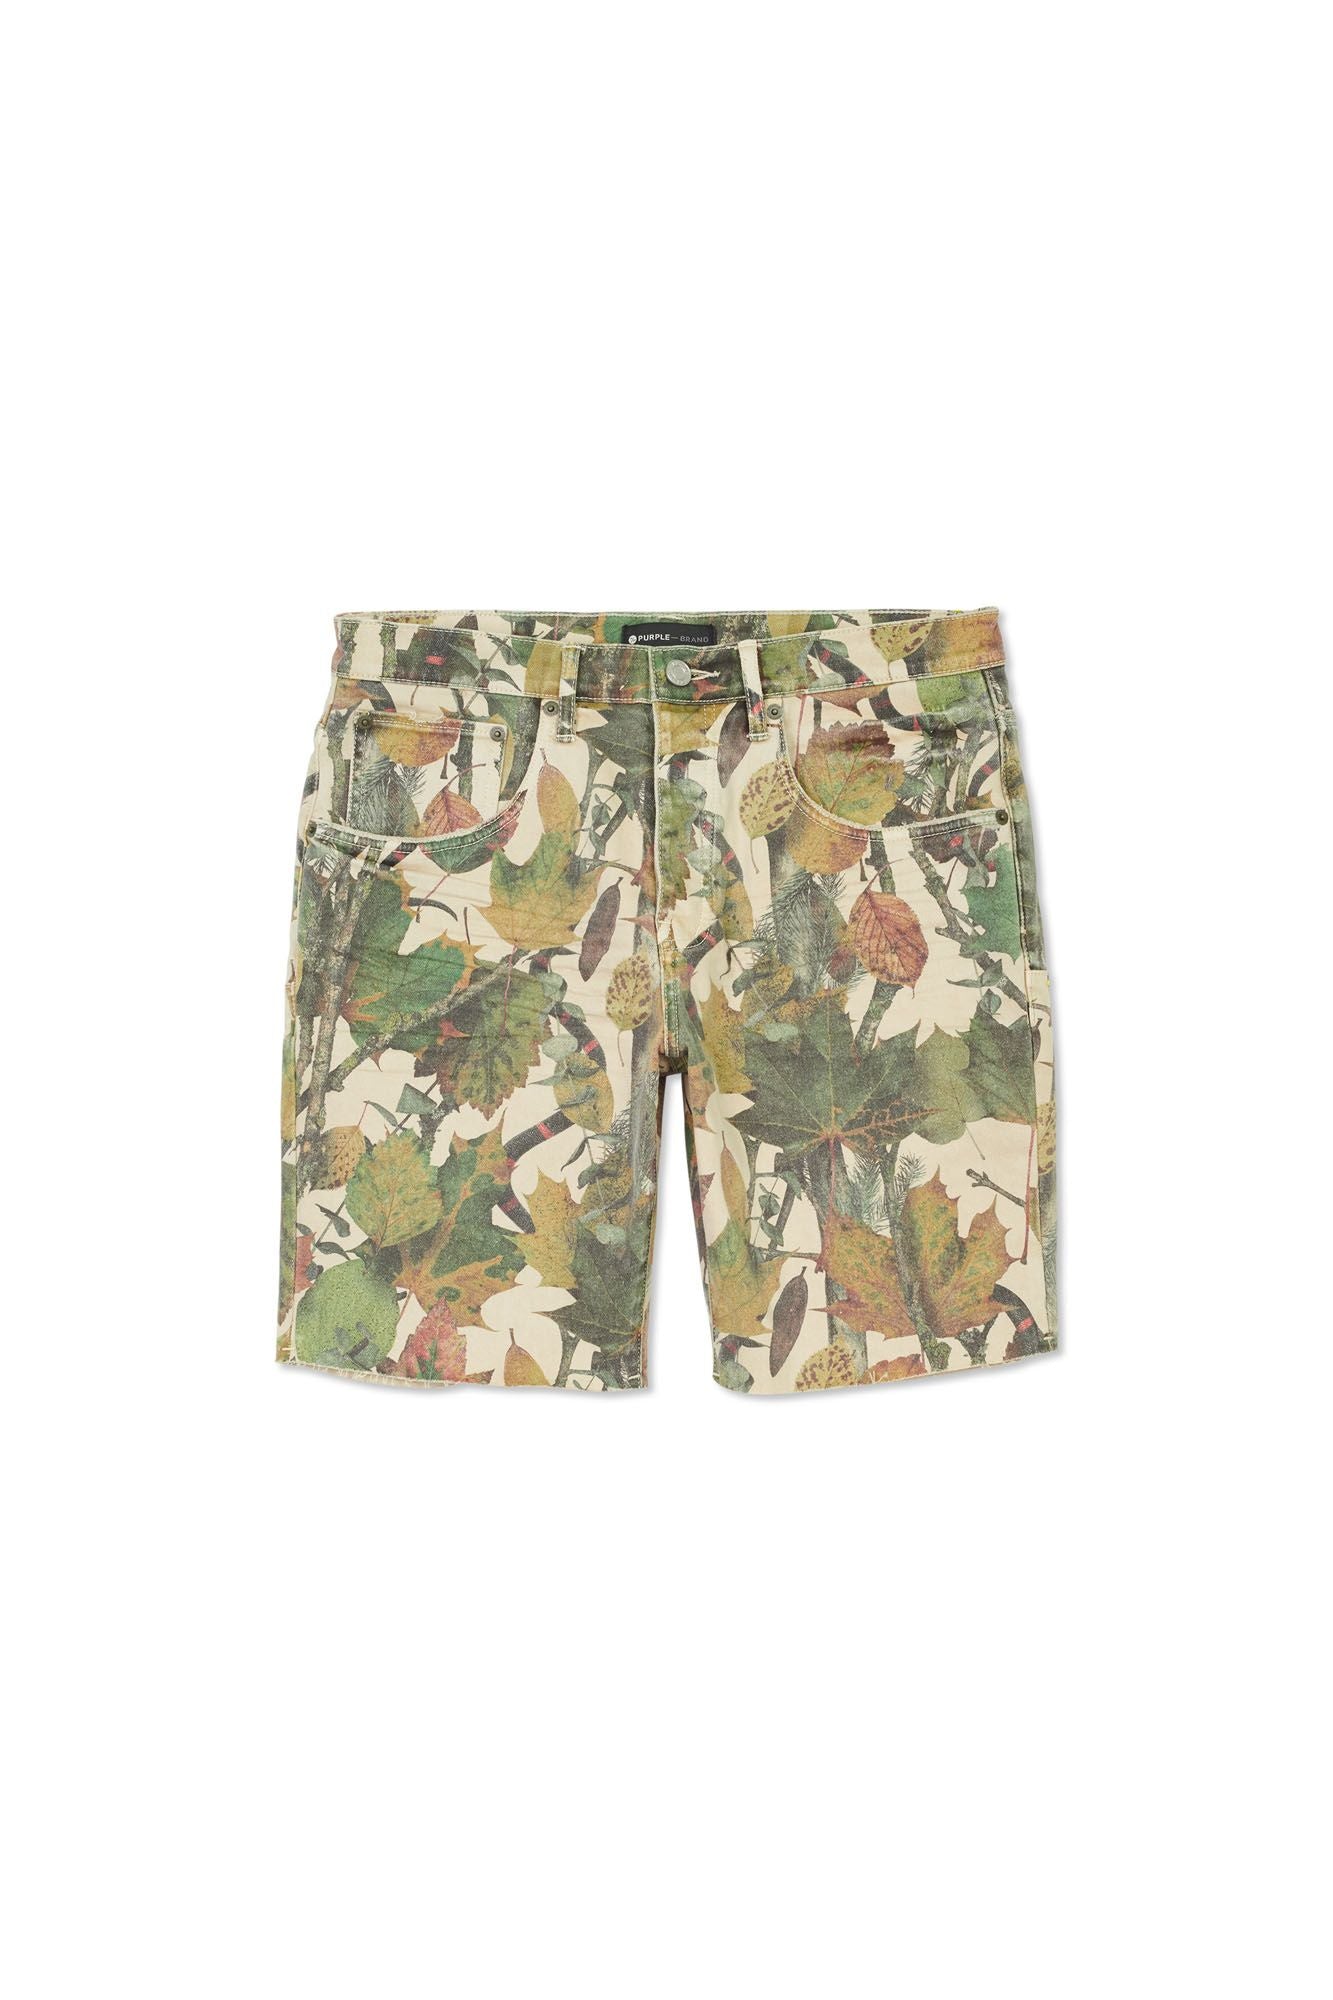 PURPLE BRAND - Men's Denim Jean Short - Mid Rise Short - Style No. P020 - Exclusive Washed Camo Tan Snake - Front